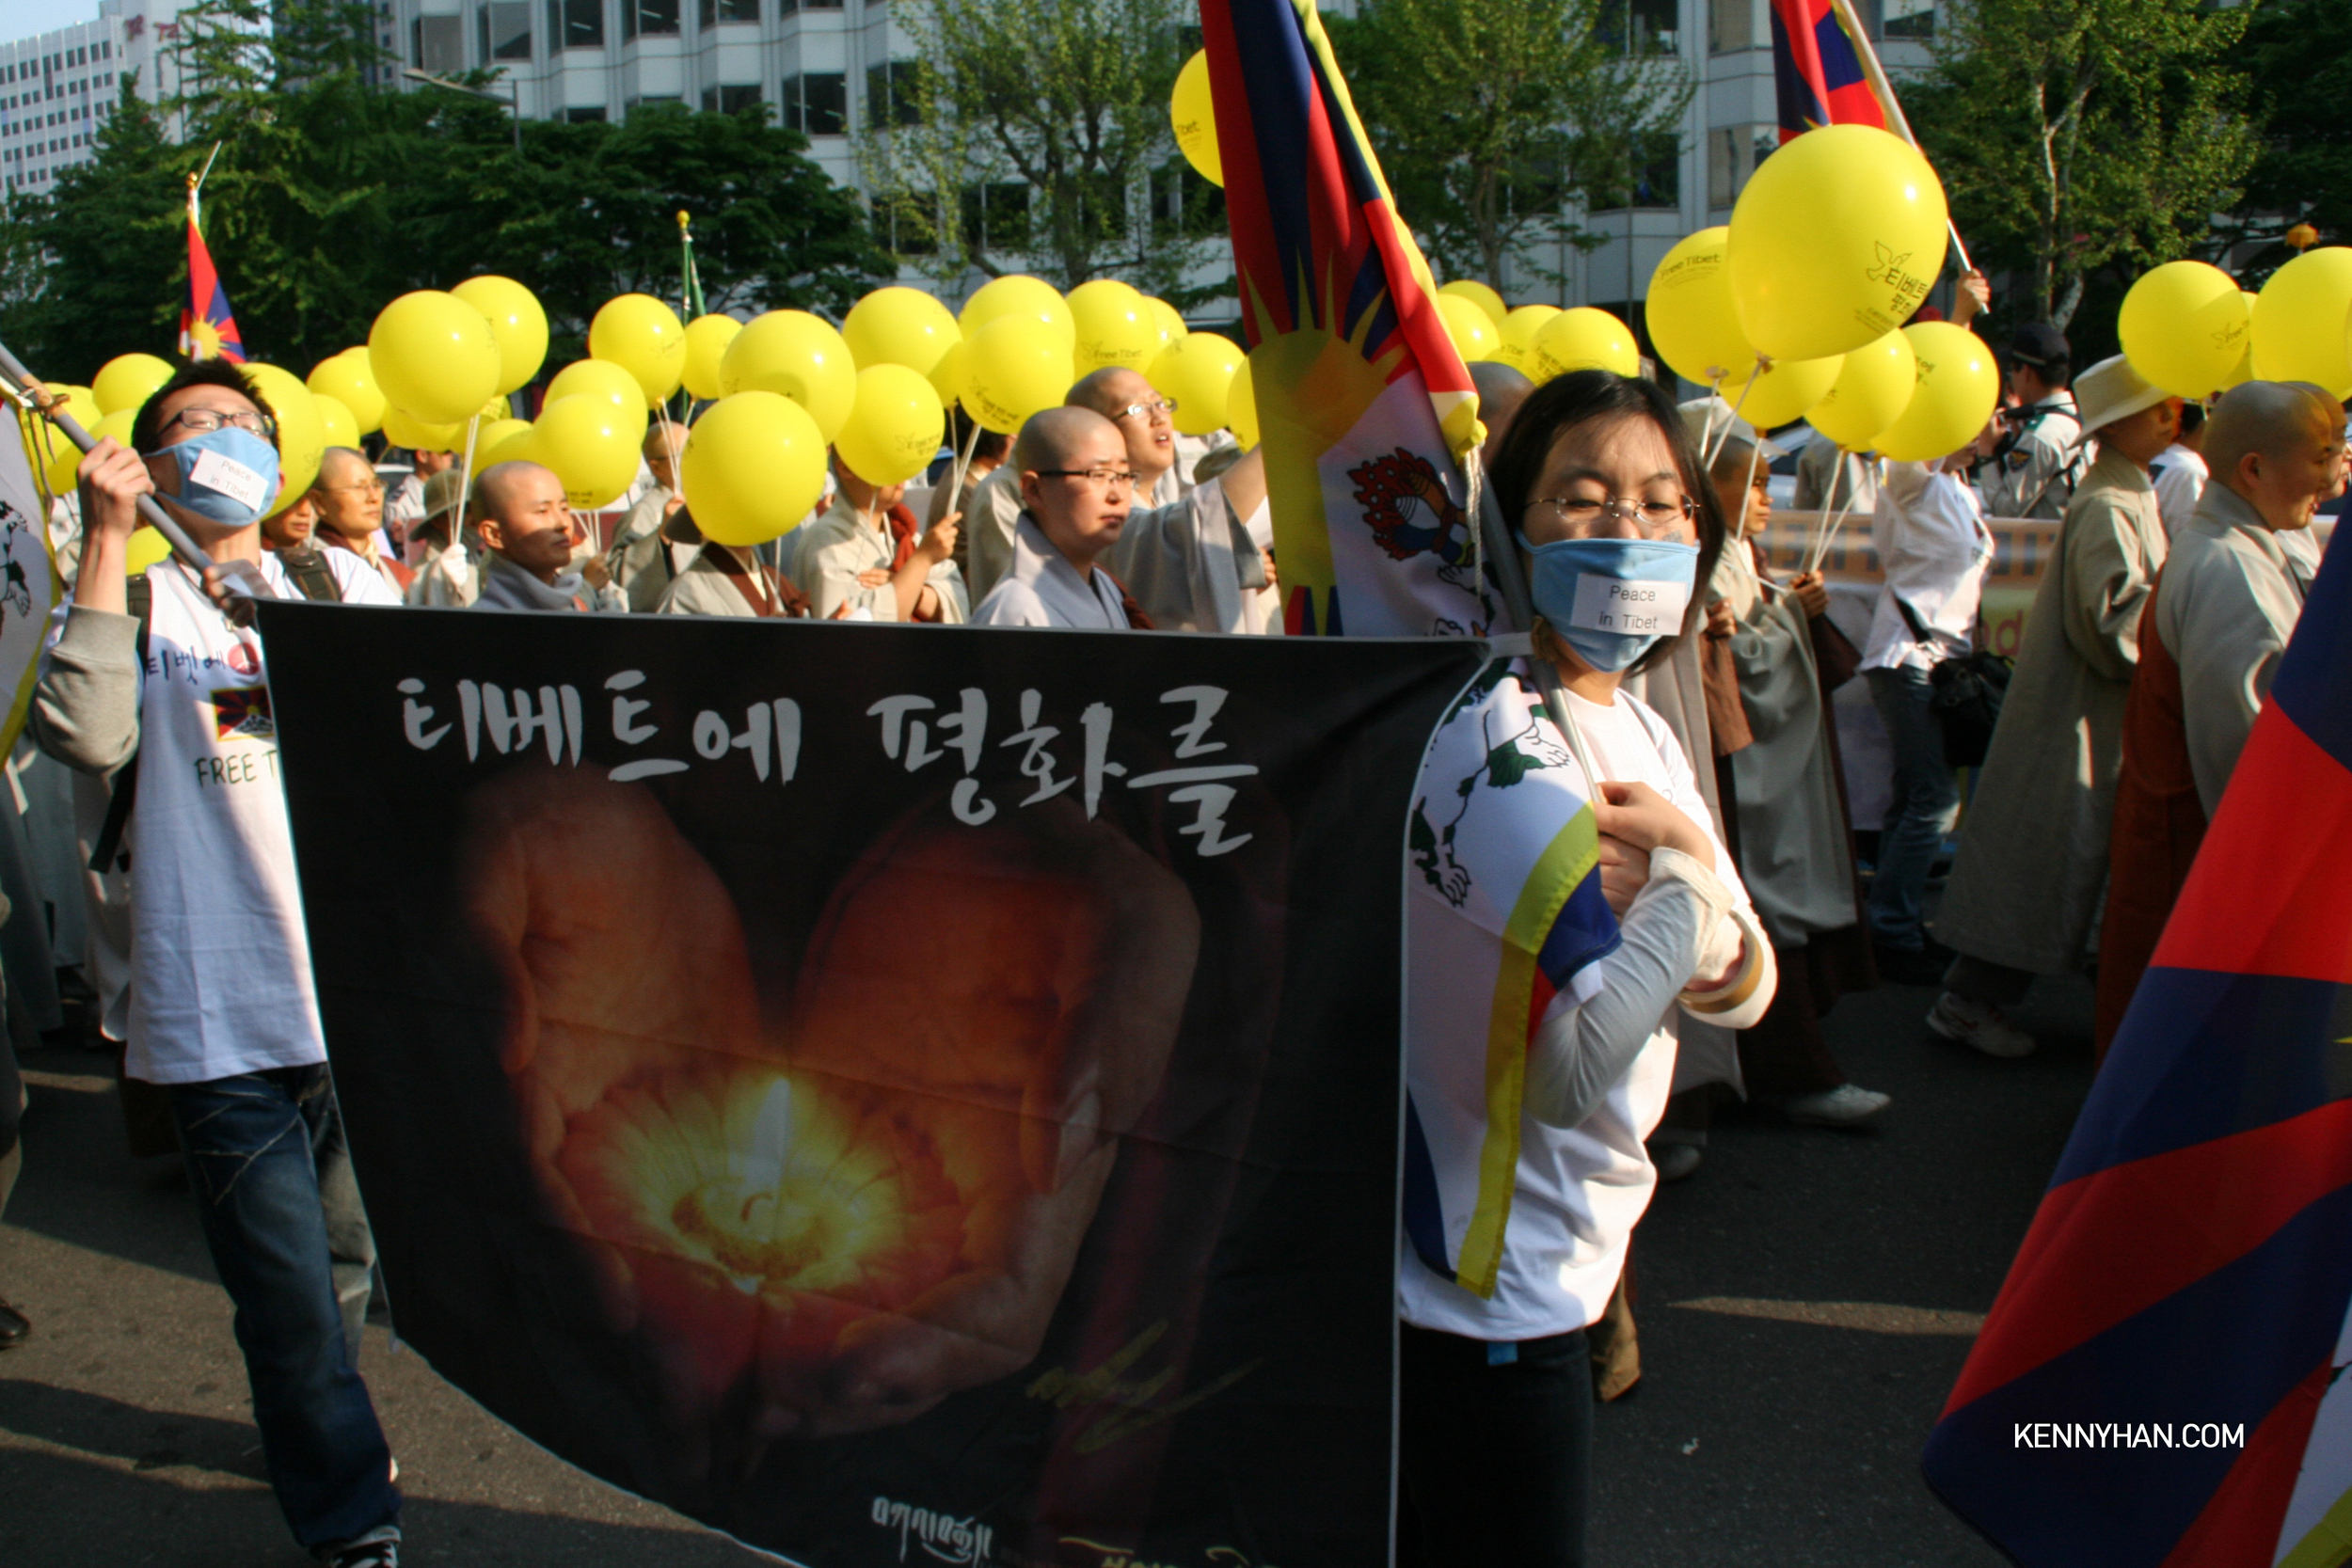  Tibetan independence movement rally in Seoul, South Korea ca.2008  